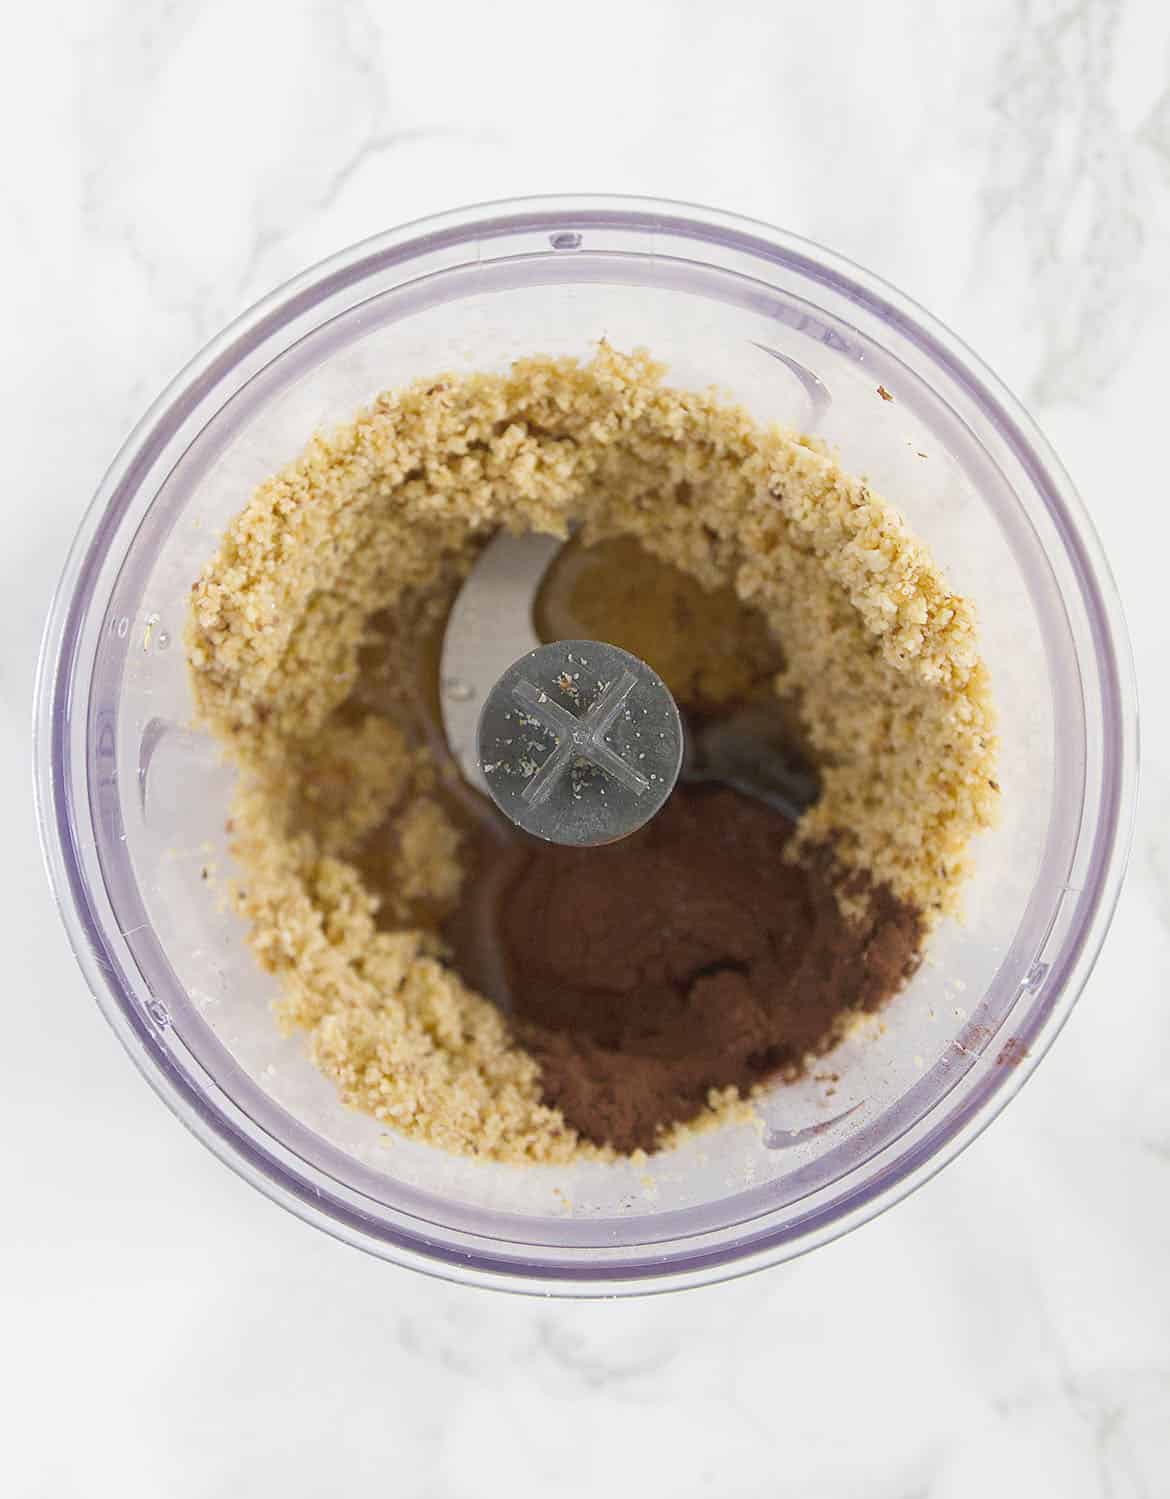 Top view of a small food processor bowl with ground hazelnuts and cocoa powder.